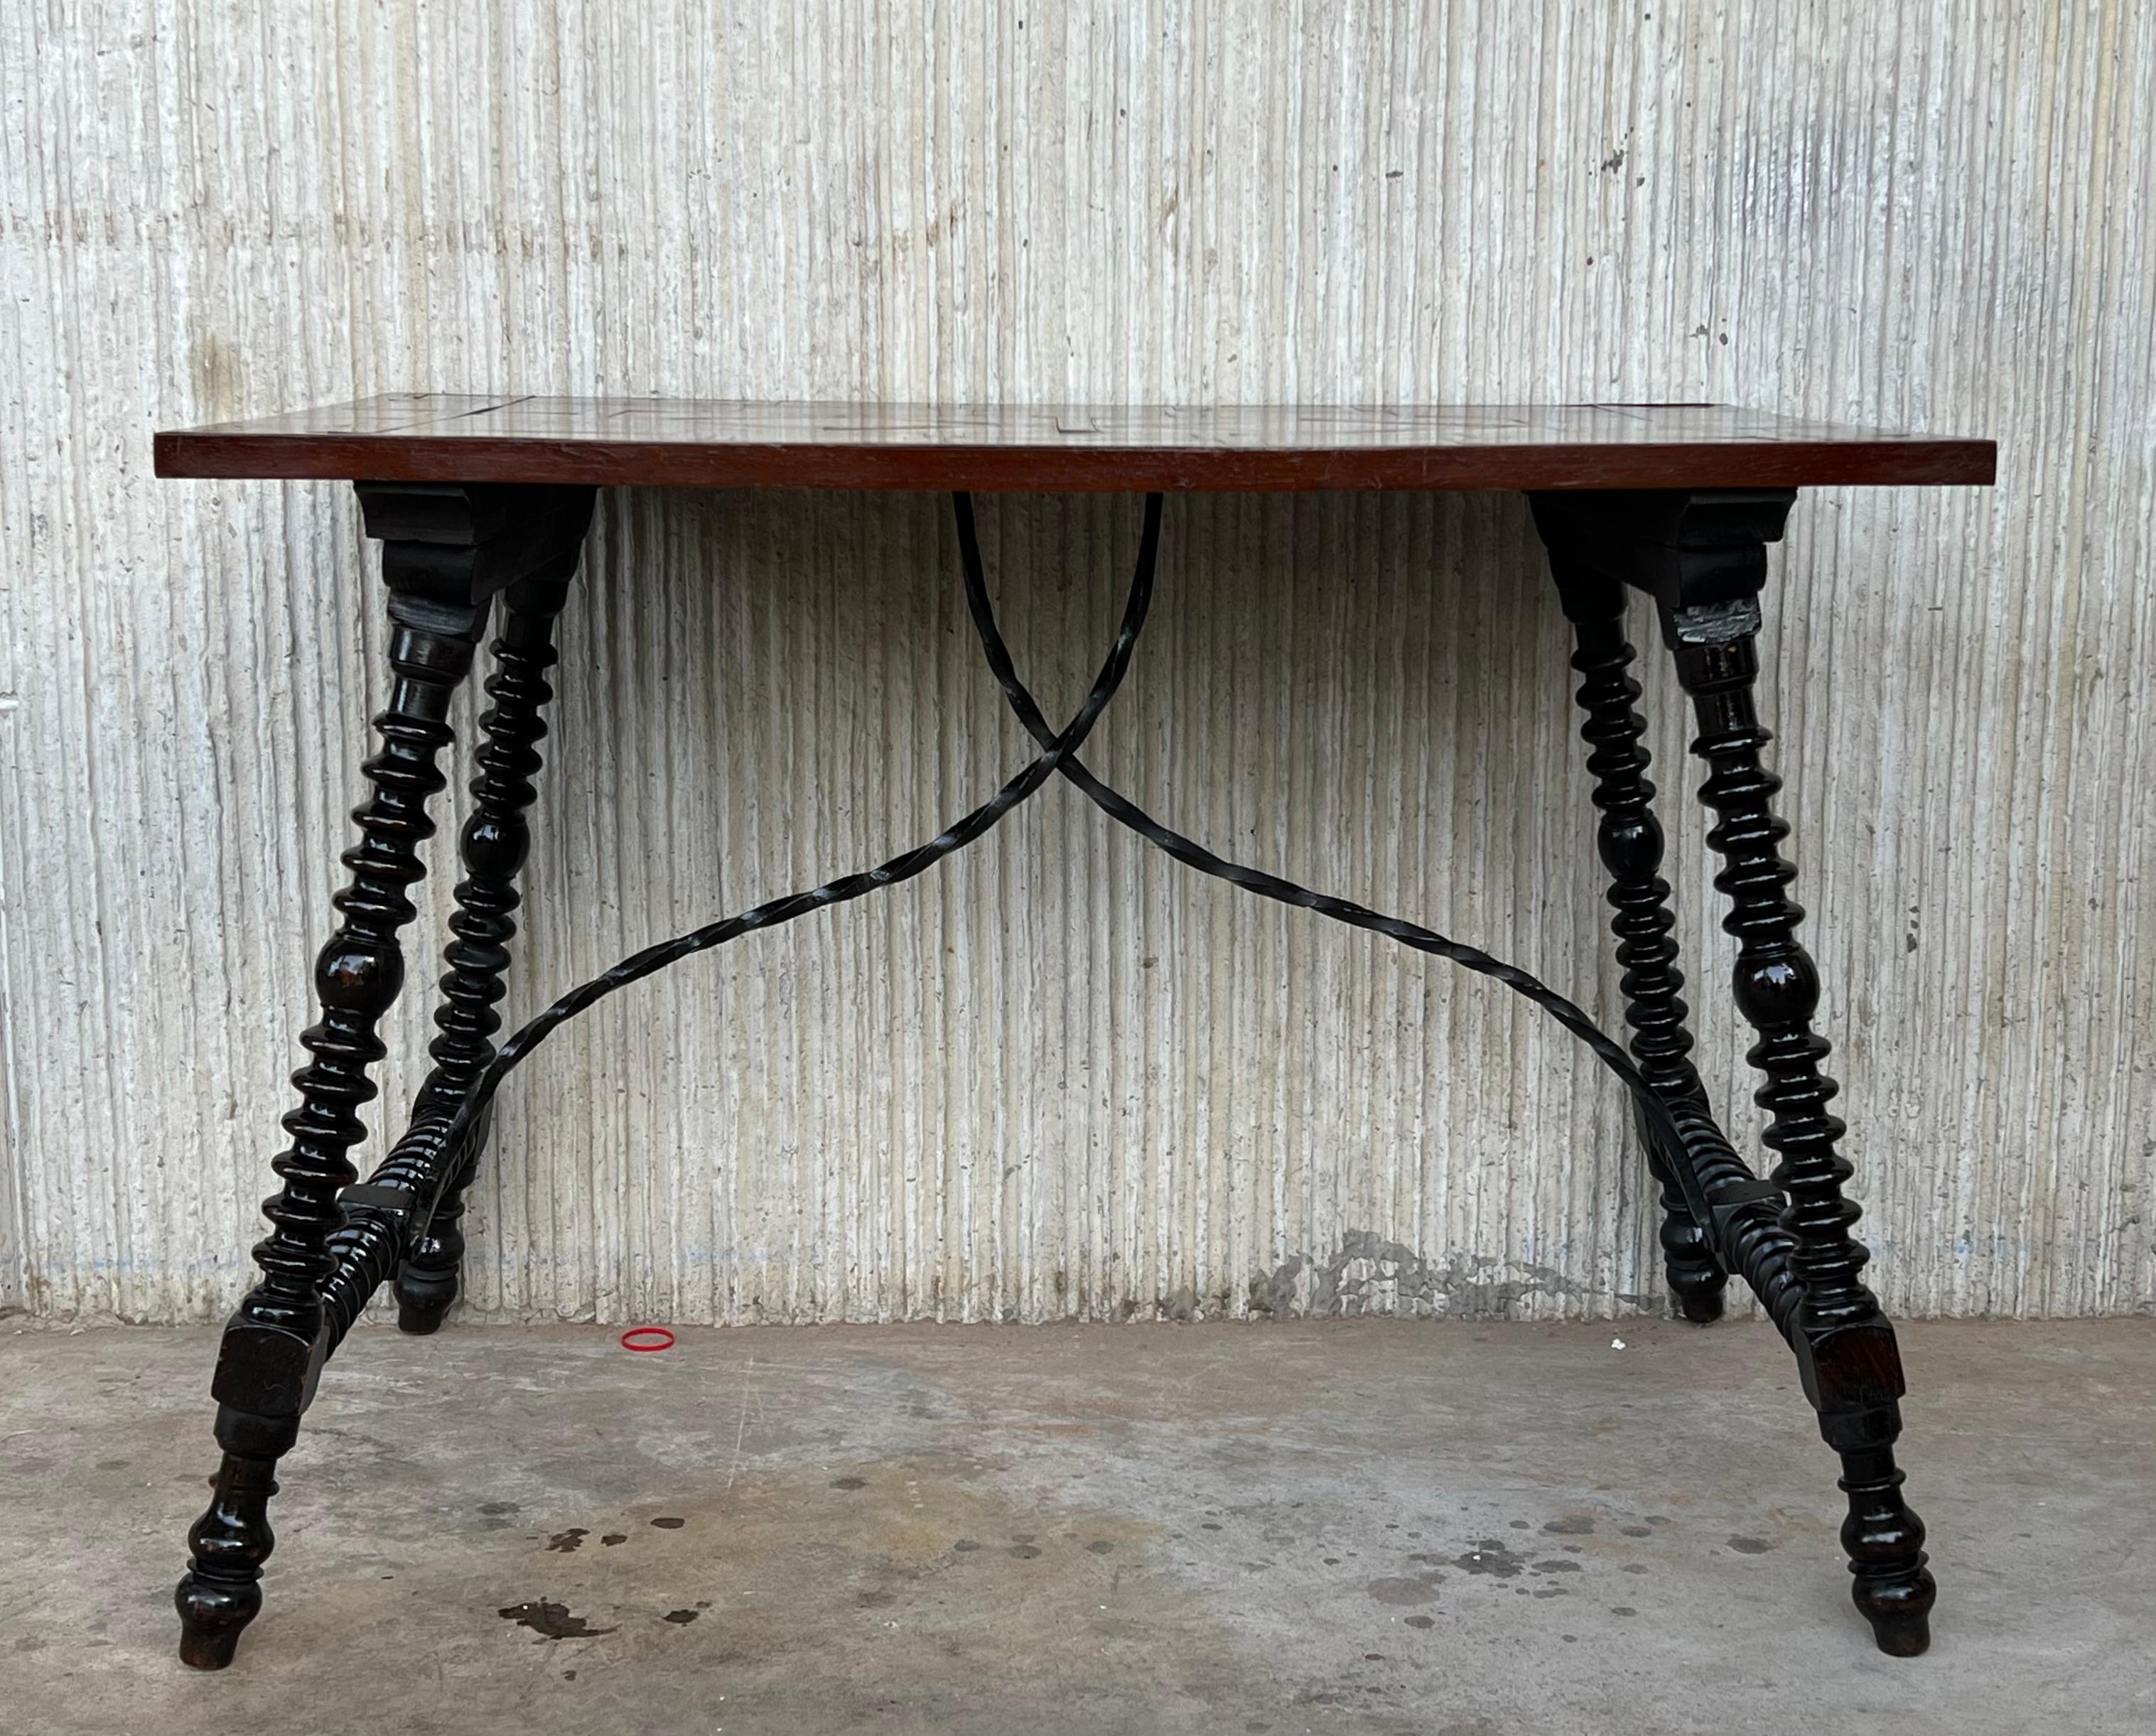 19th Century Baroque Spanish side table with marquetry top and iron stretcher

19th century Spanish trestle table in walnut. This piece has a great scale, lovely turned legs and beautiful marquetry top. This table could be used as an end table,